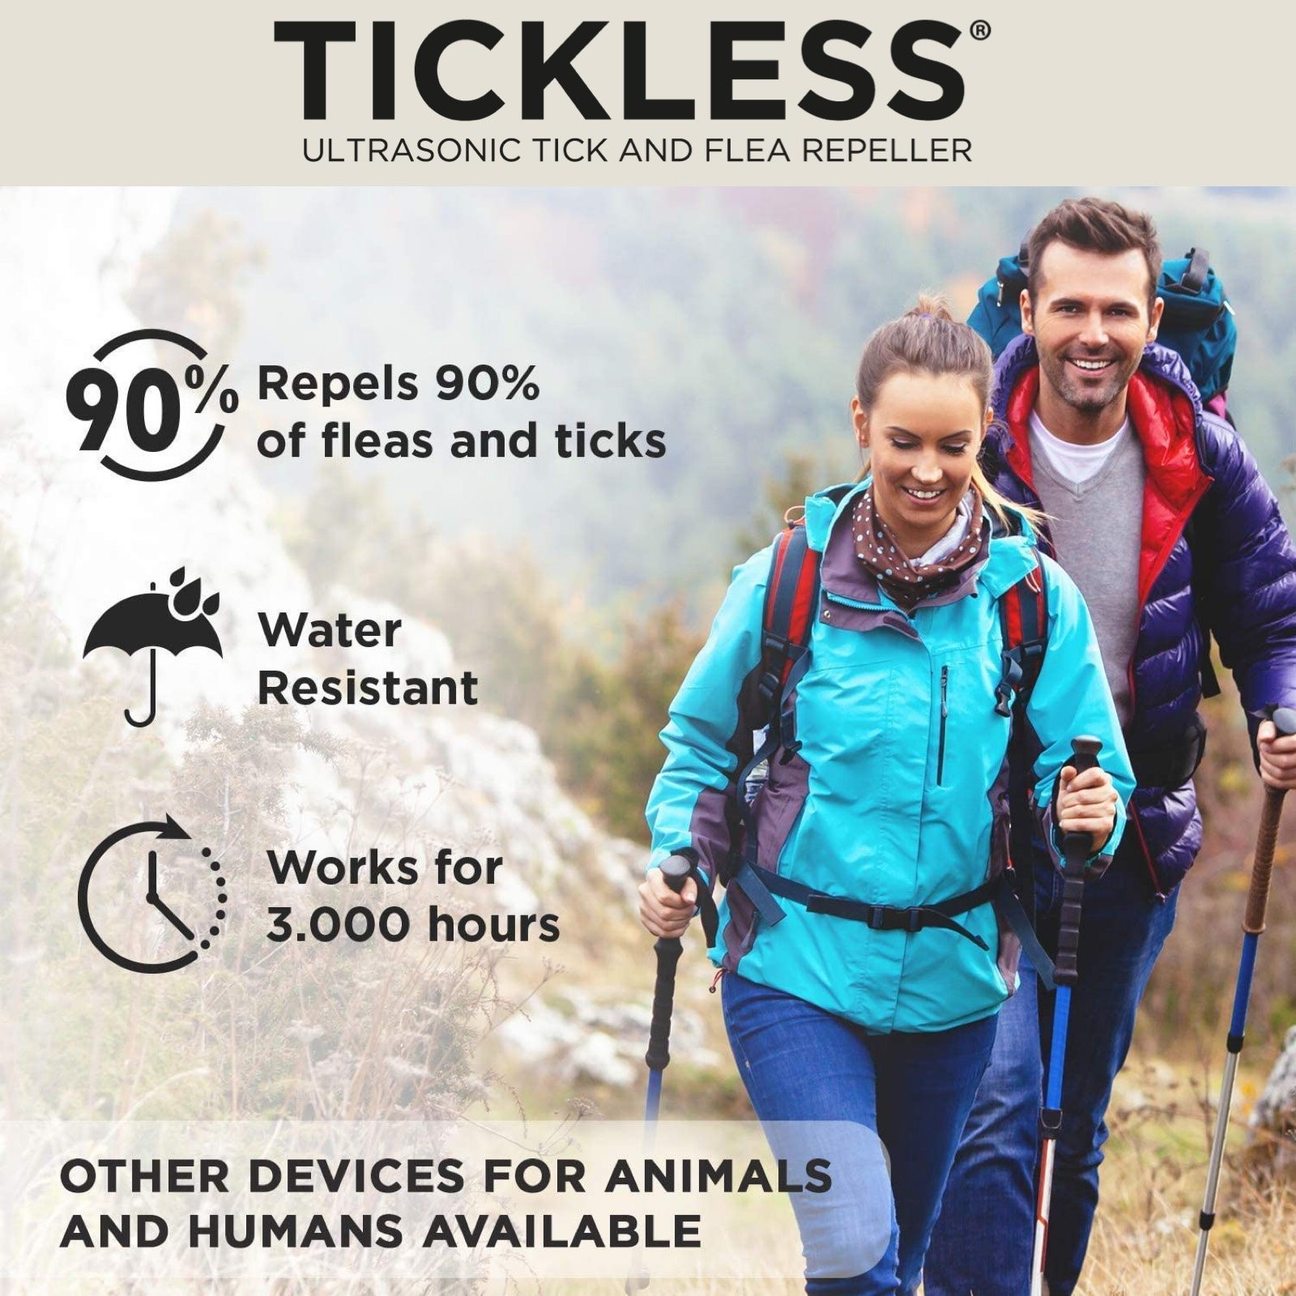 SonicGuard Tickless Ultrasonic Repeller for Humans | Wearable Tick Control and Prevention - FlexTran Animal Care